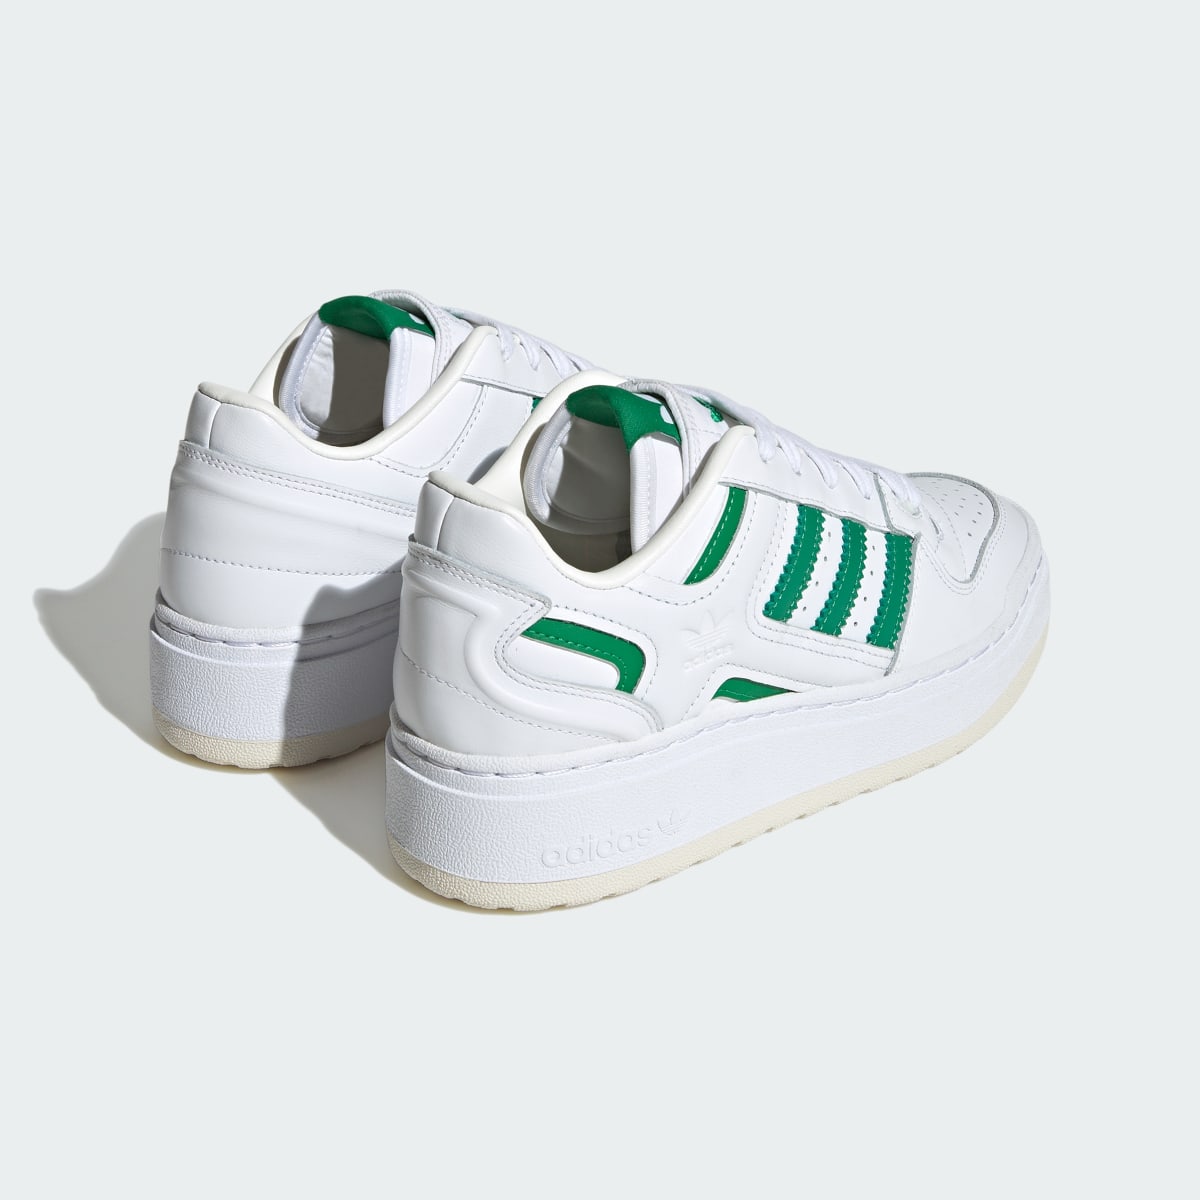 Adidas Chaussure Forum XLG. 6